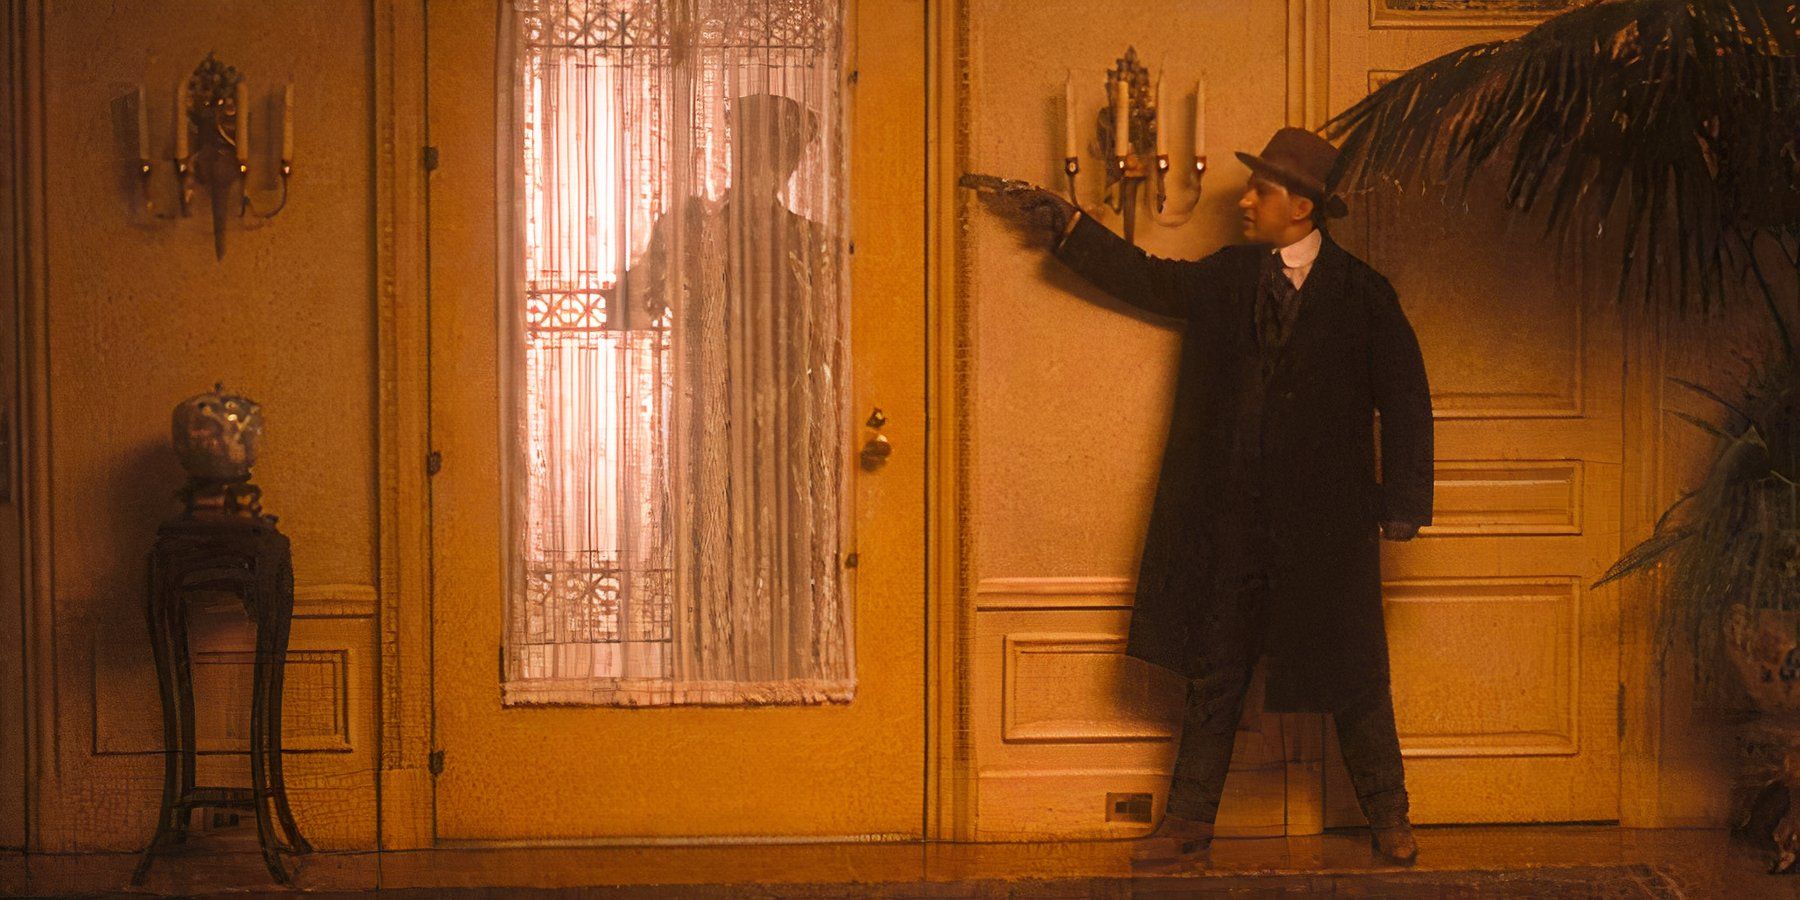 Peter Clemenza readies his revolver next to a door as the silhouette of someone approaches through the glass in The Godfather Part II.